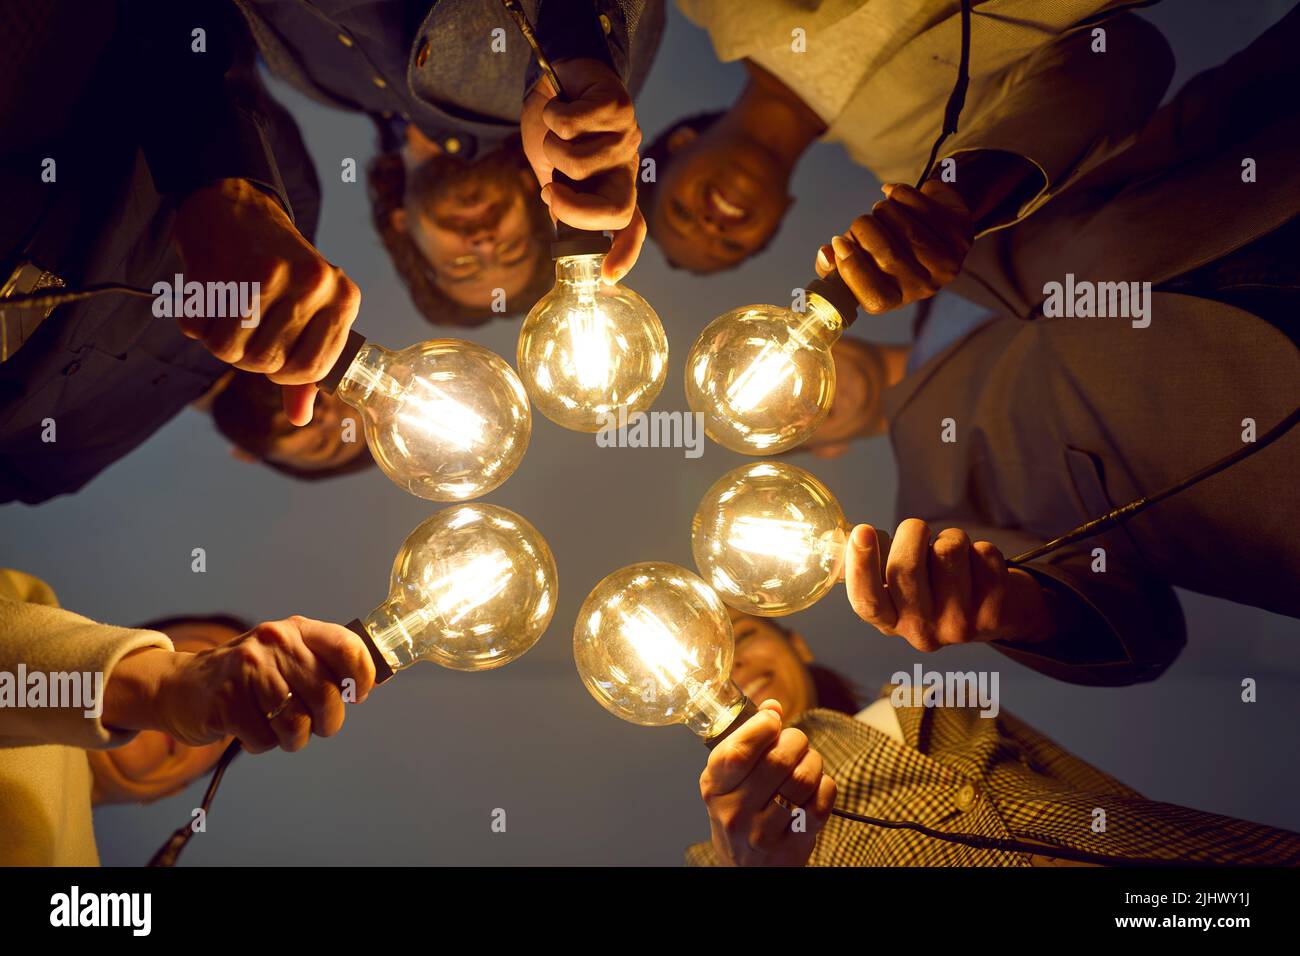 Happy diverse business team holding light bulbs as symbol of sharing creative ideas Stock Photo